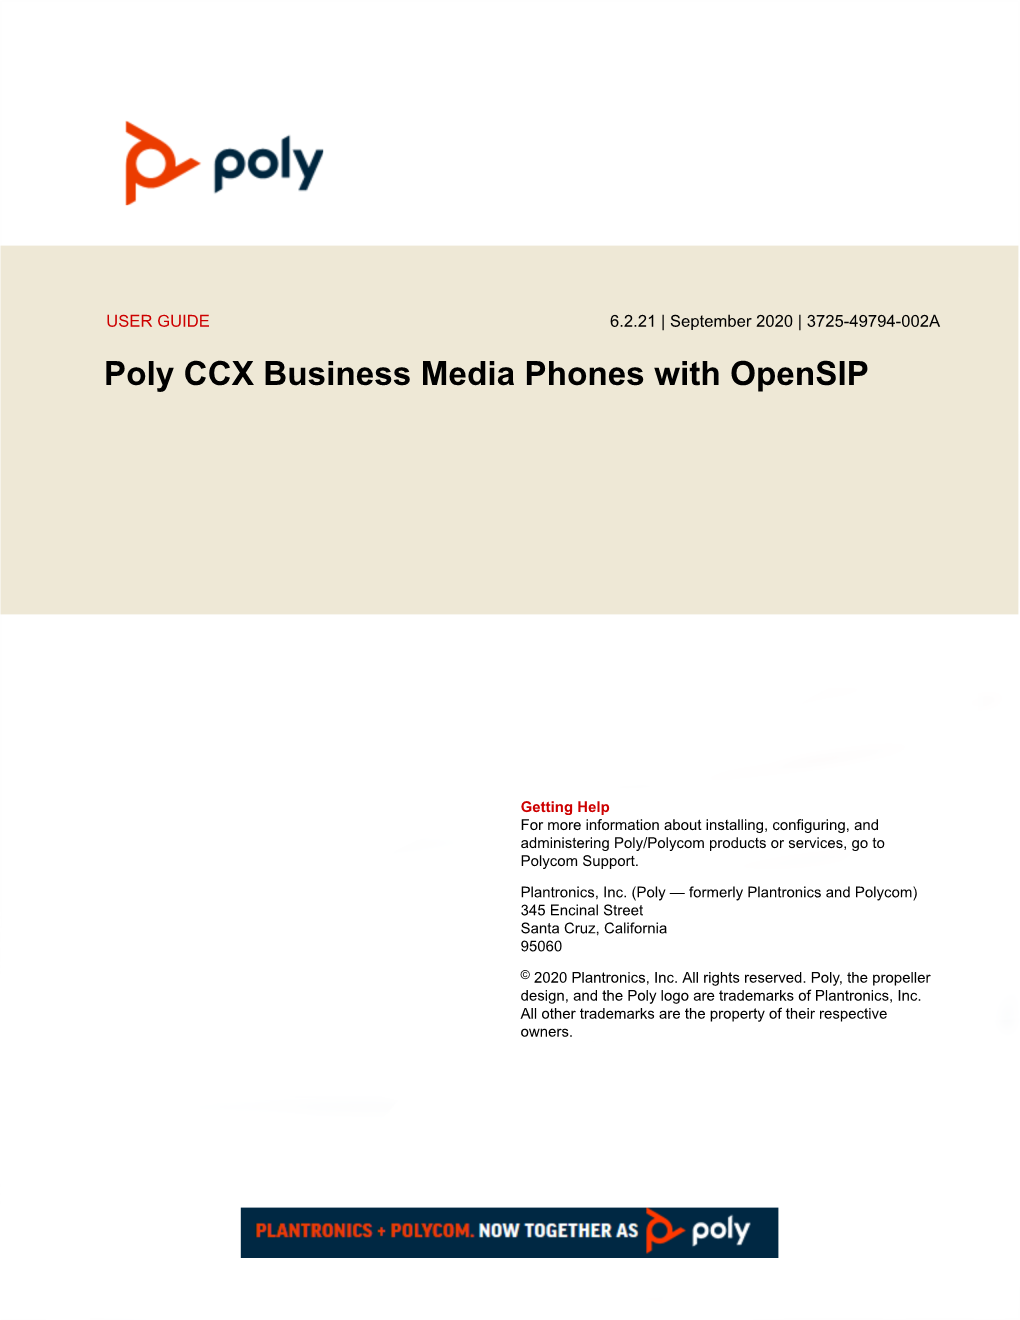 Poly CCX Business Media Phones with Opensip User Guide Contains Overview Information for Navigating and Performing Tasks on Poly CCX Phones